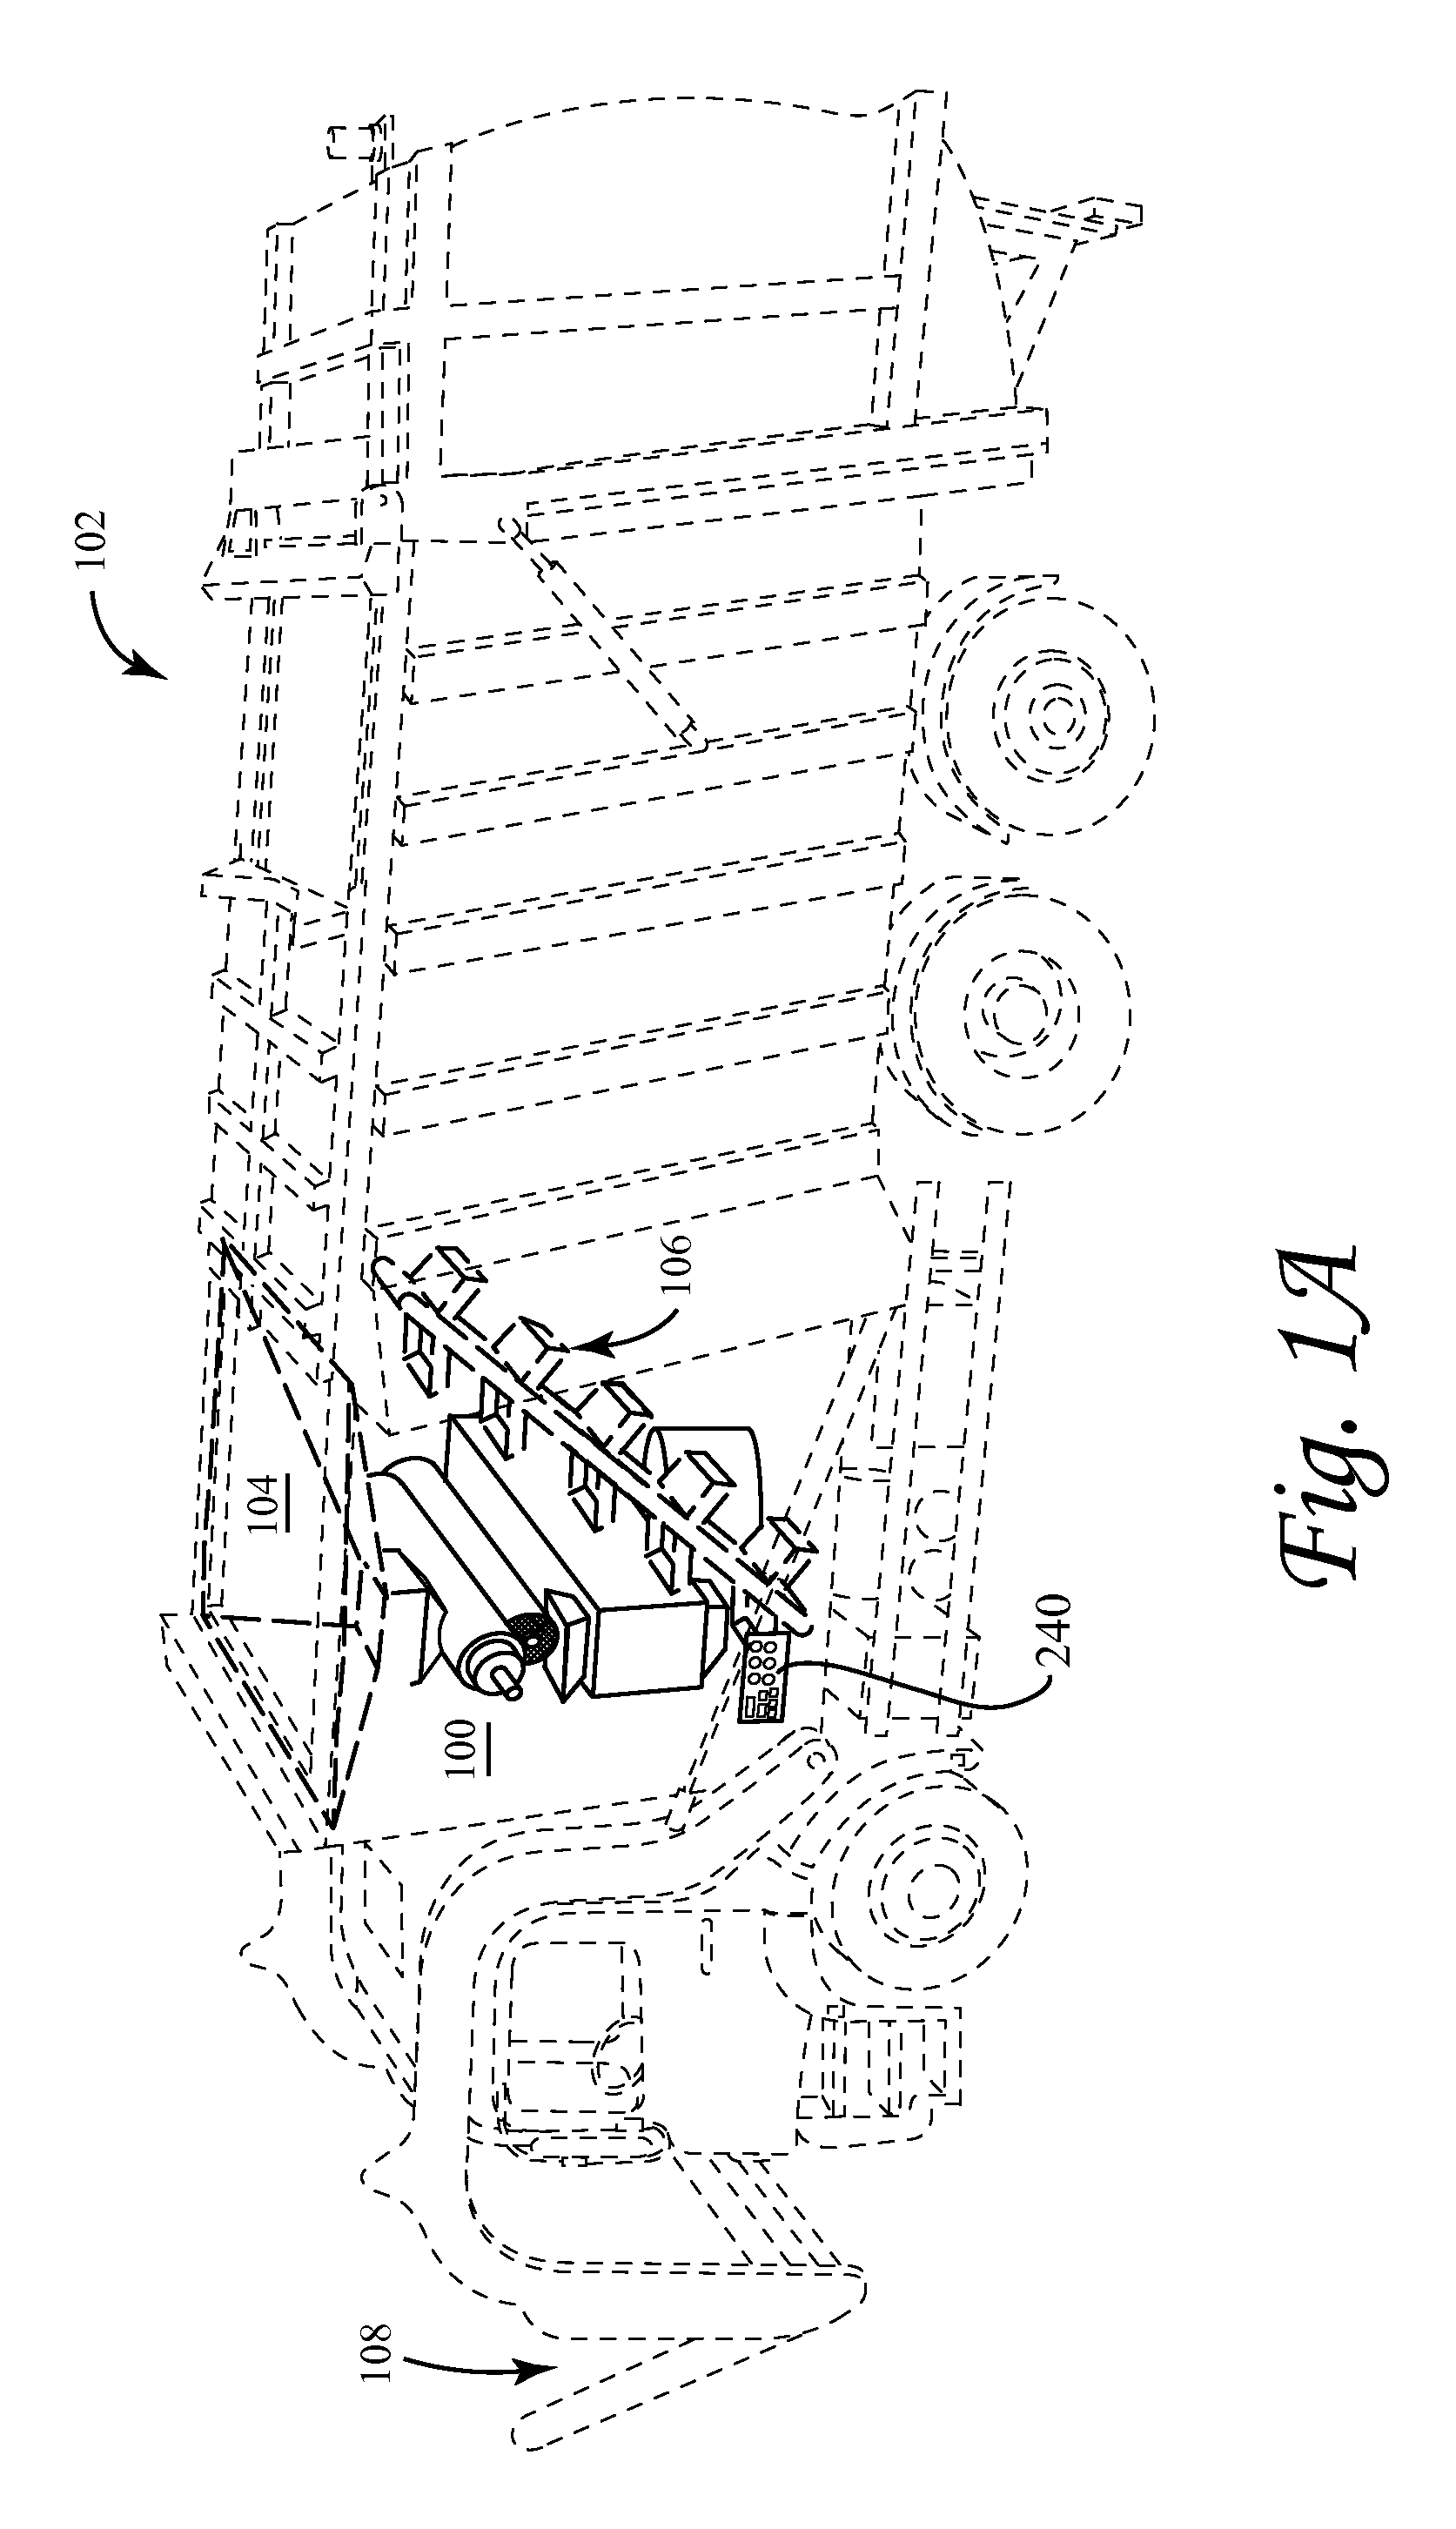 Device for conversion of waste to sources of energy or fertilizer and a method thereof